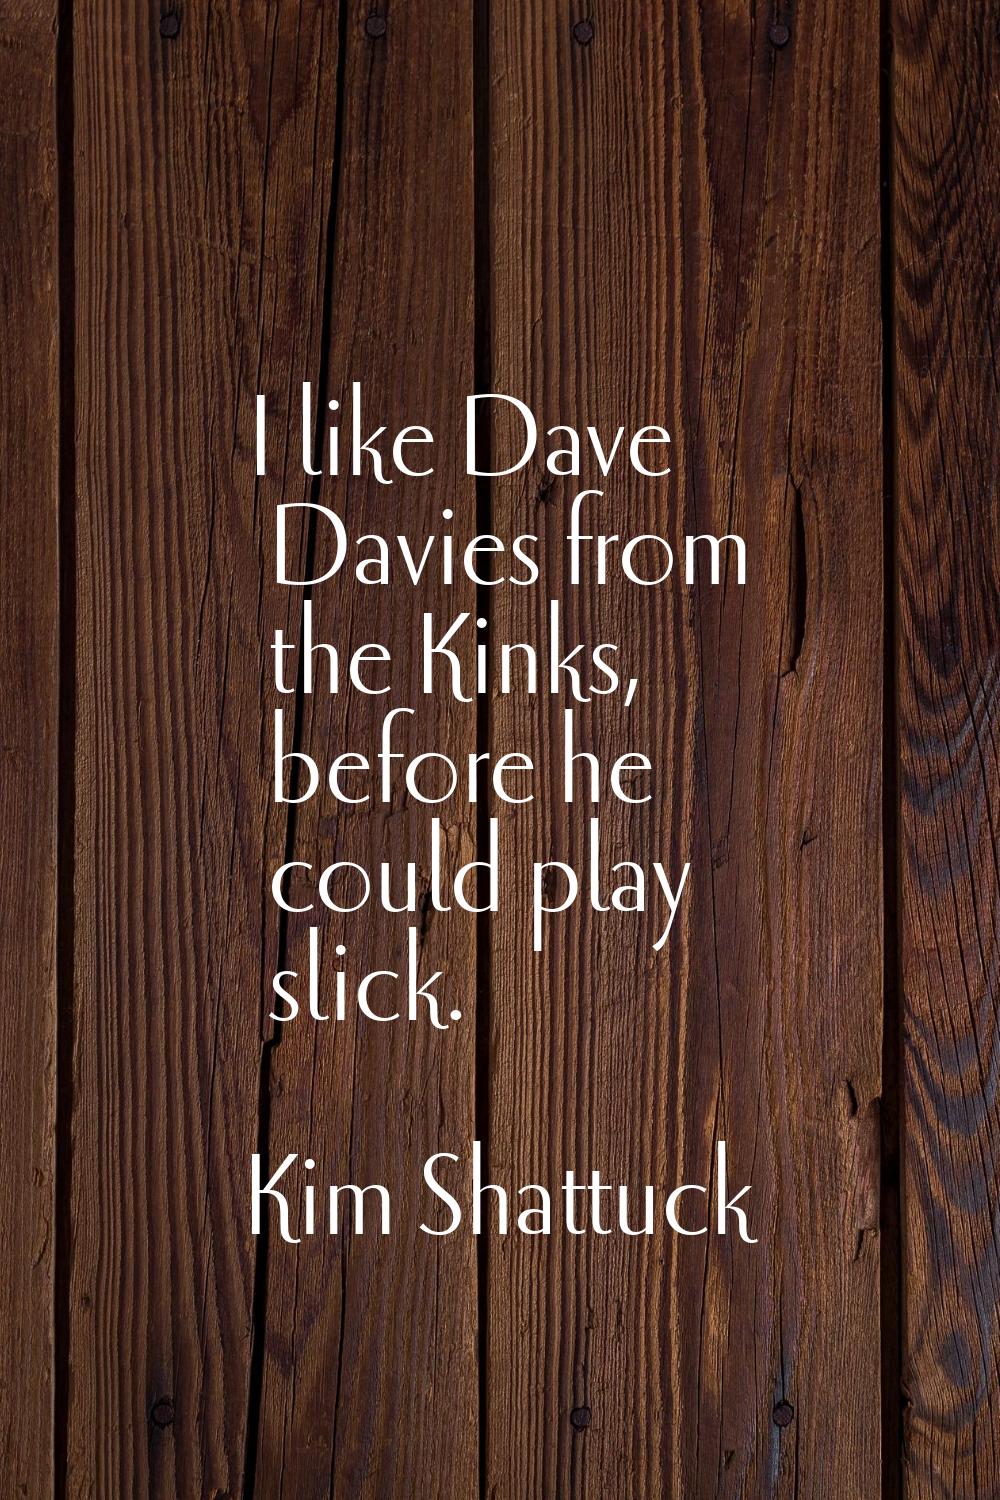 I like Dave Davies from the Kinks, before he could play slick.